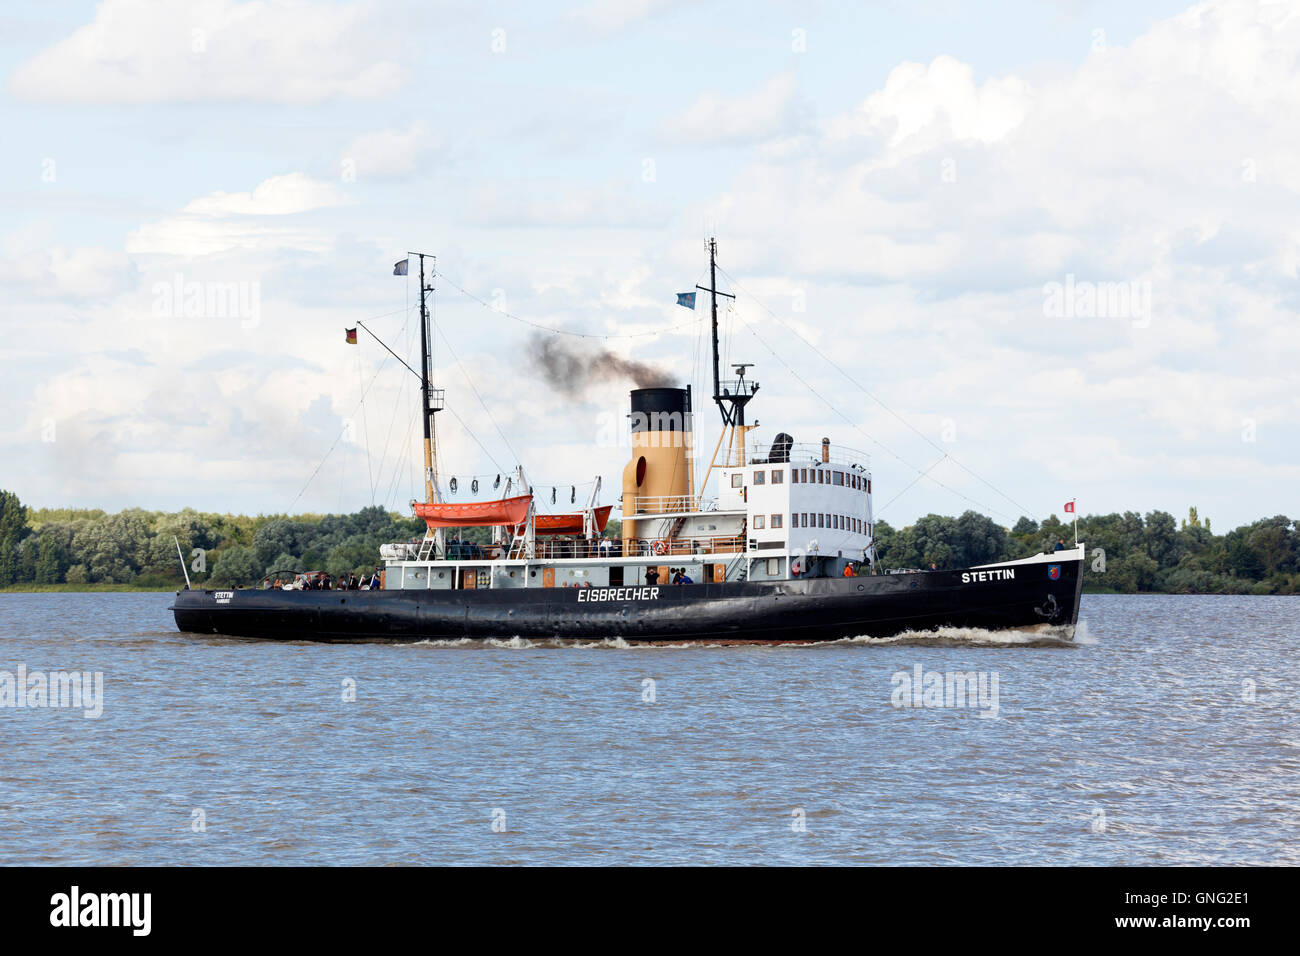 Historic icebreaker STETTIN, today a passenger ship making excursions, on the Elbe river Stock Photo